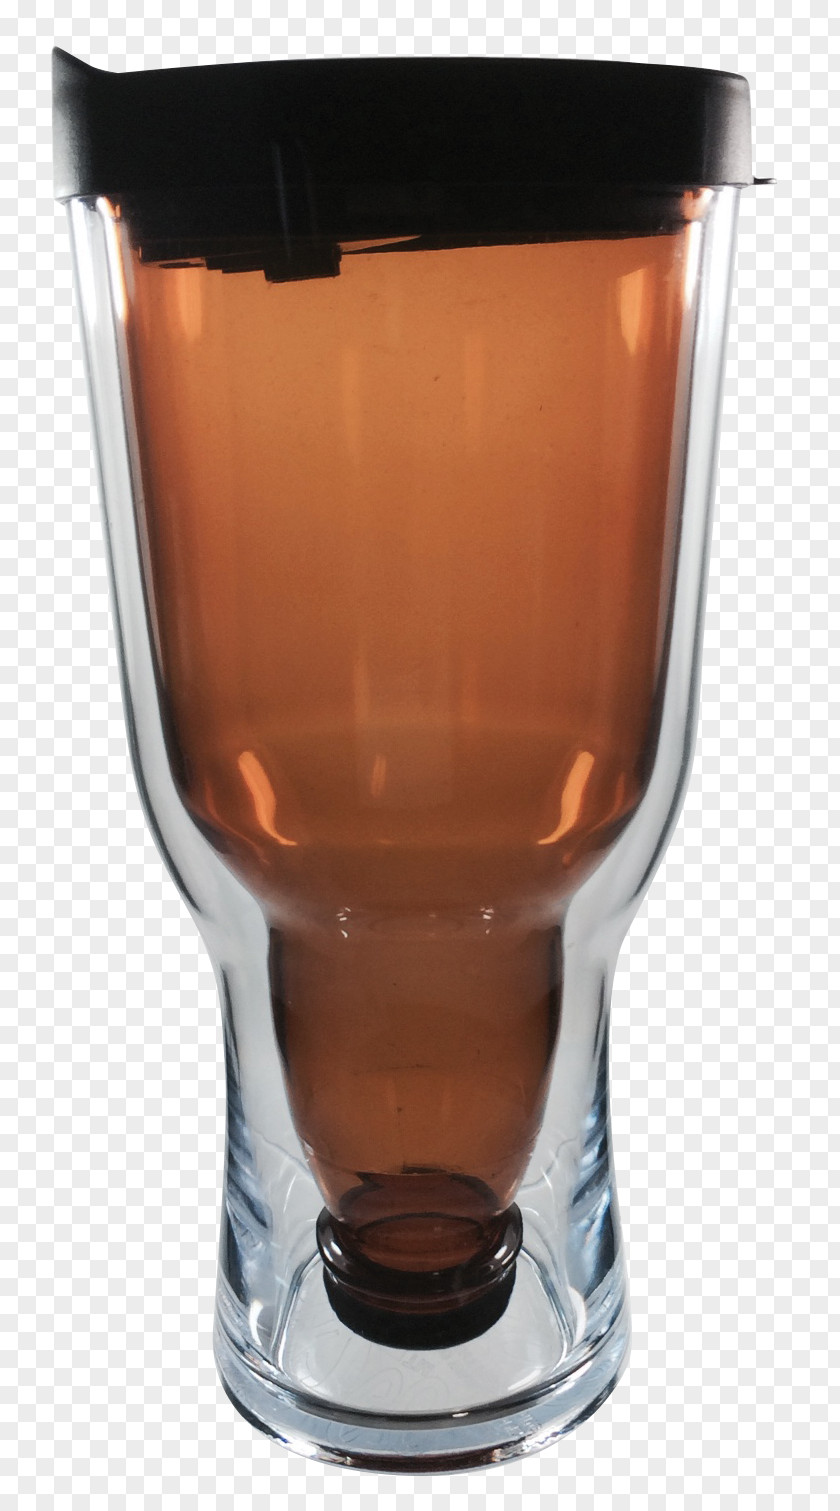 Glass Pint Drink Highball Beer Glasses PNG